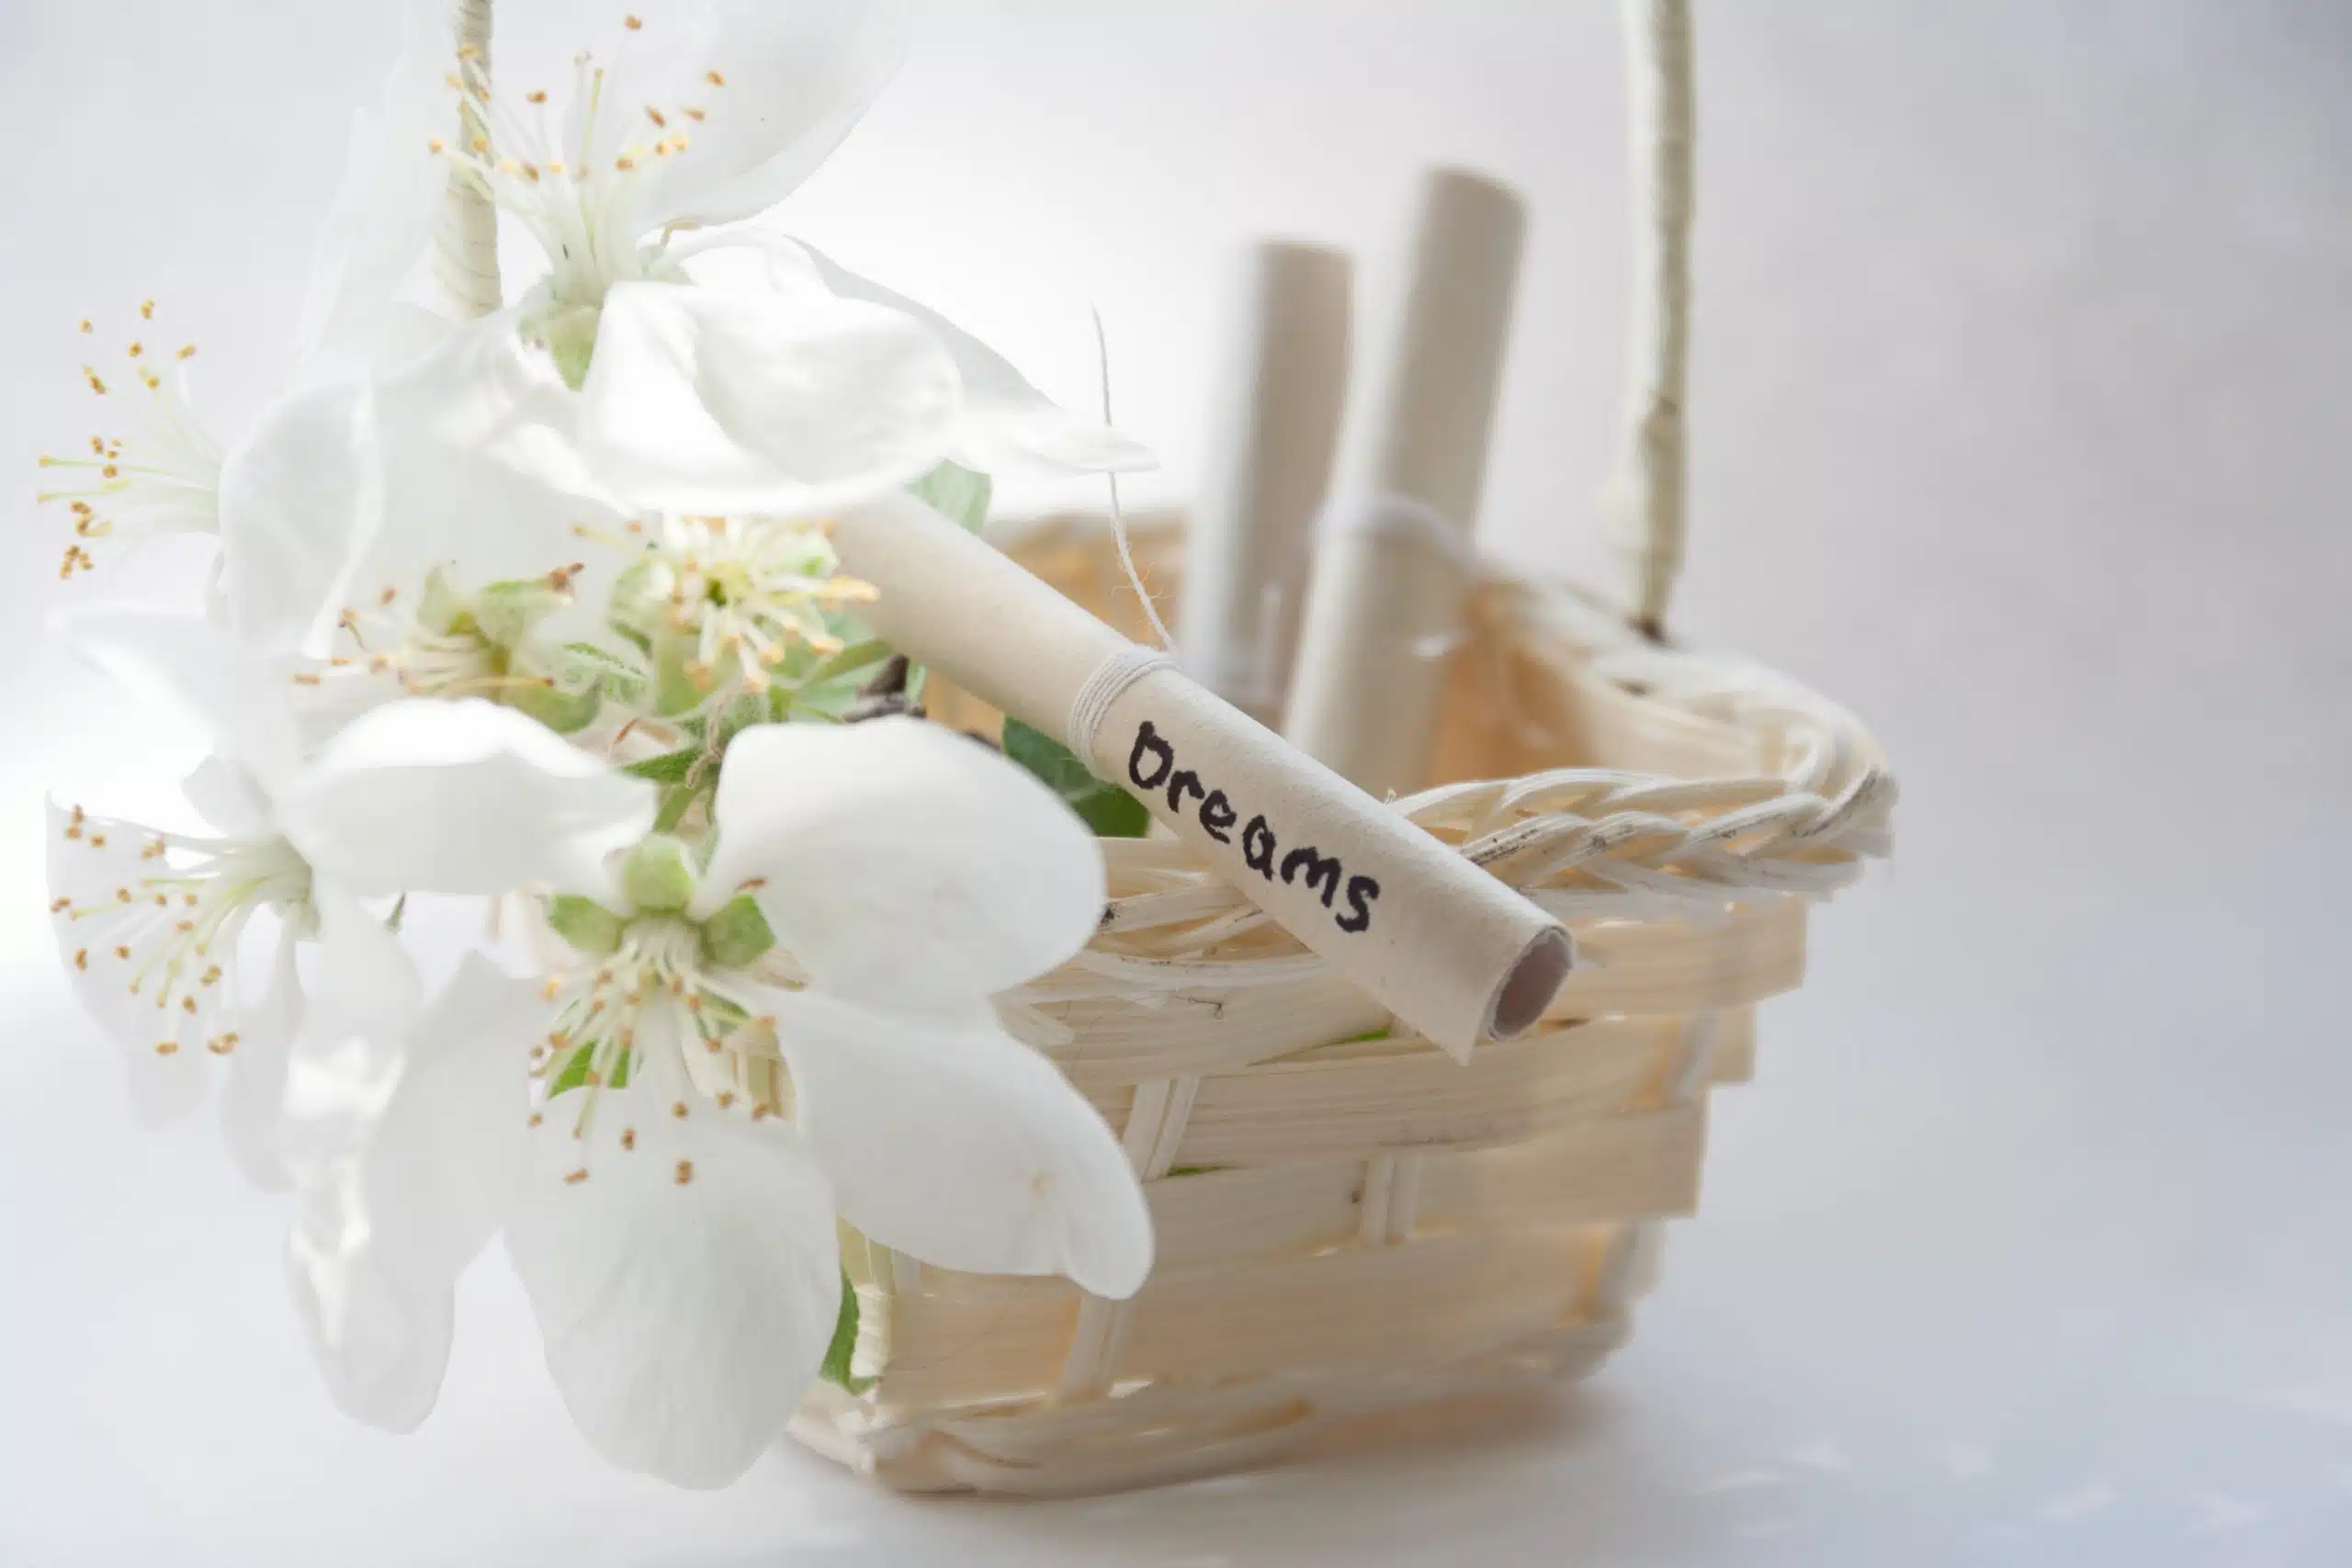 In a woven basket, white flowers and rolled paper with the word dream on it